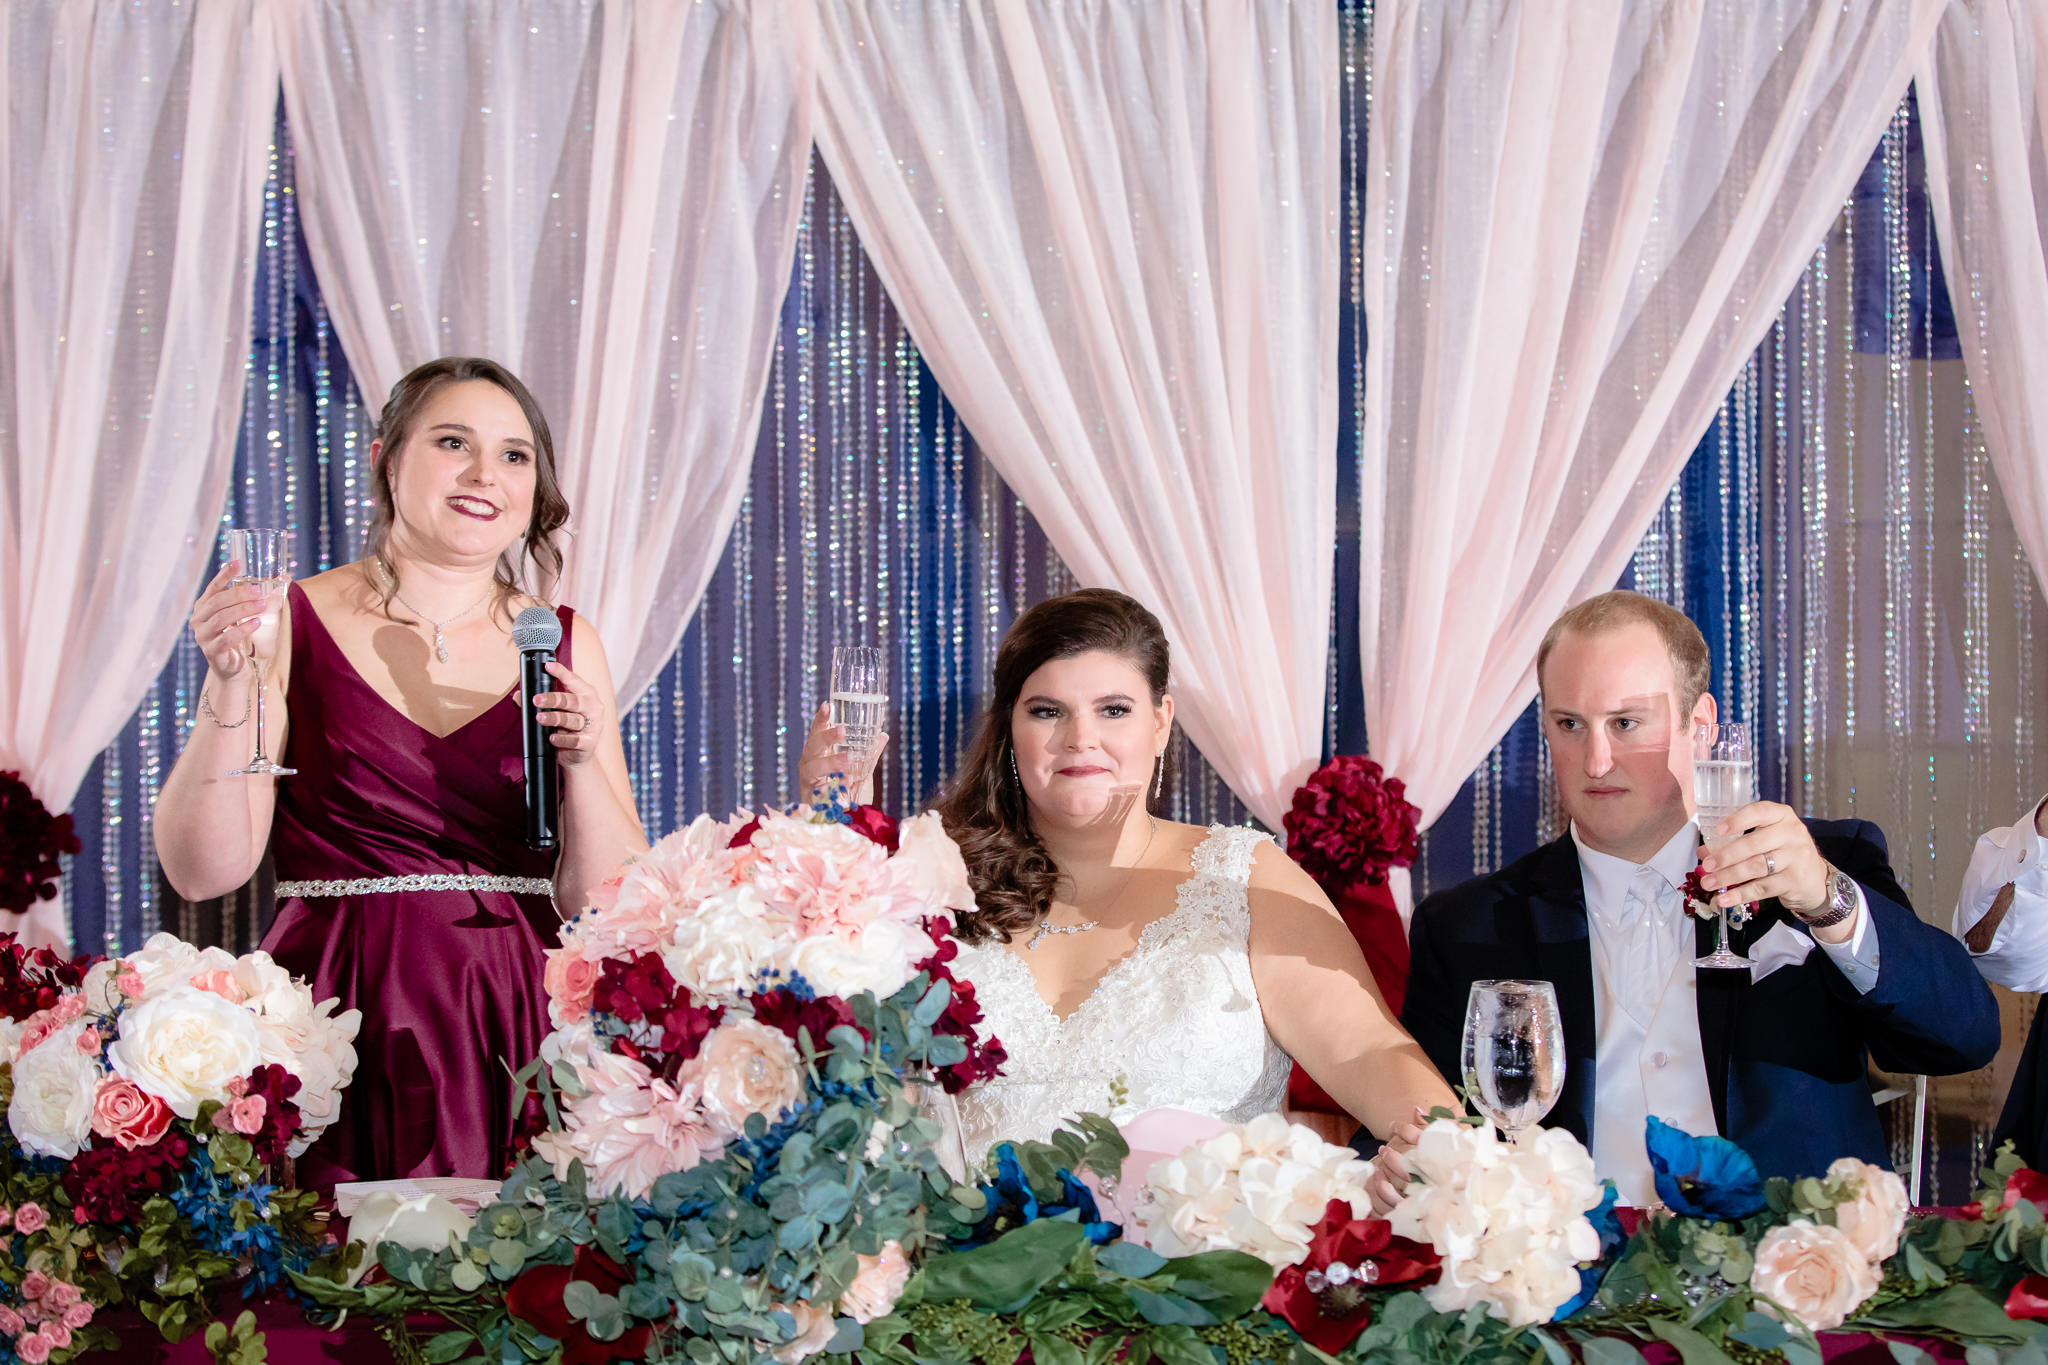 The maid of honor leads a toast for the bride and groom at the Pennsylvanian